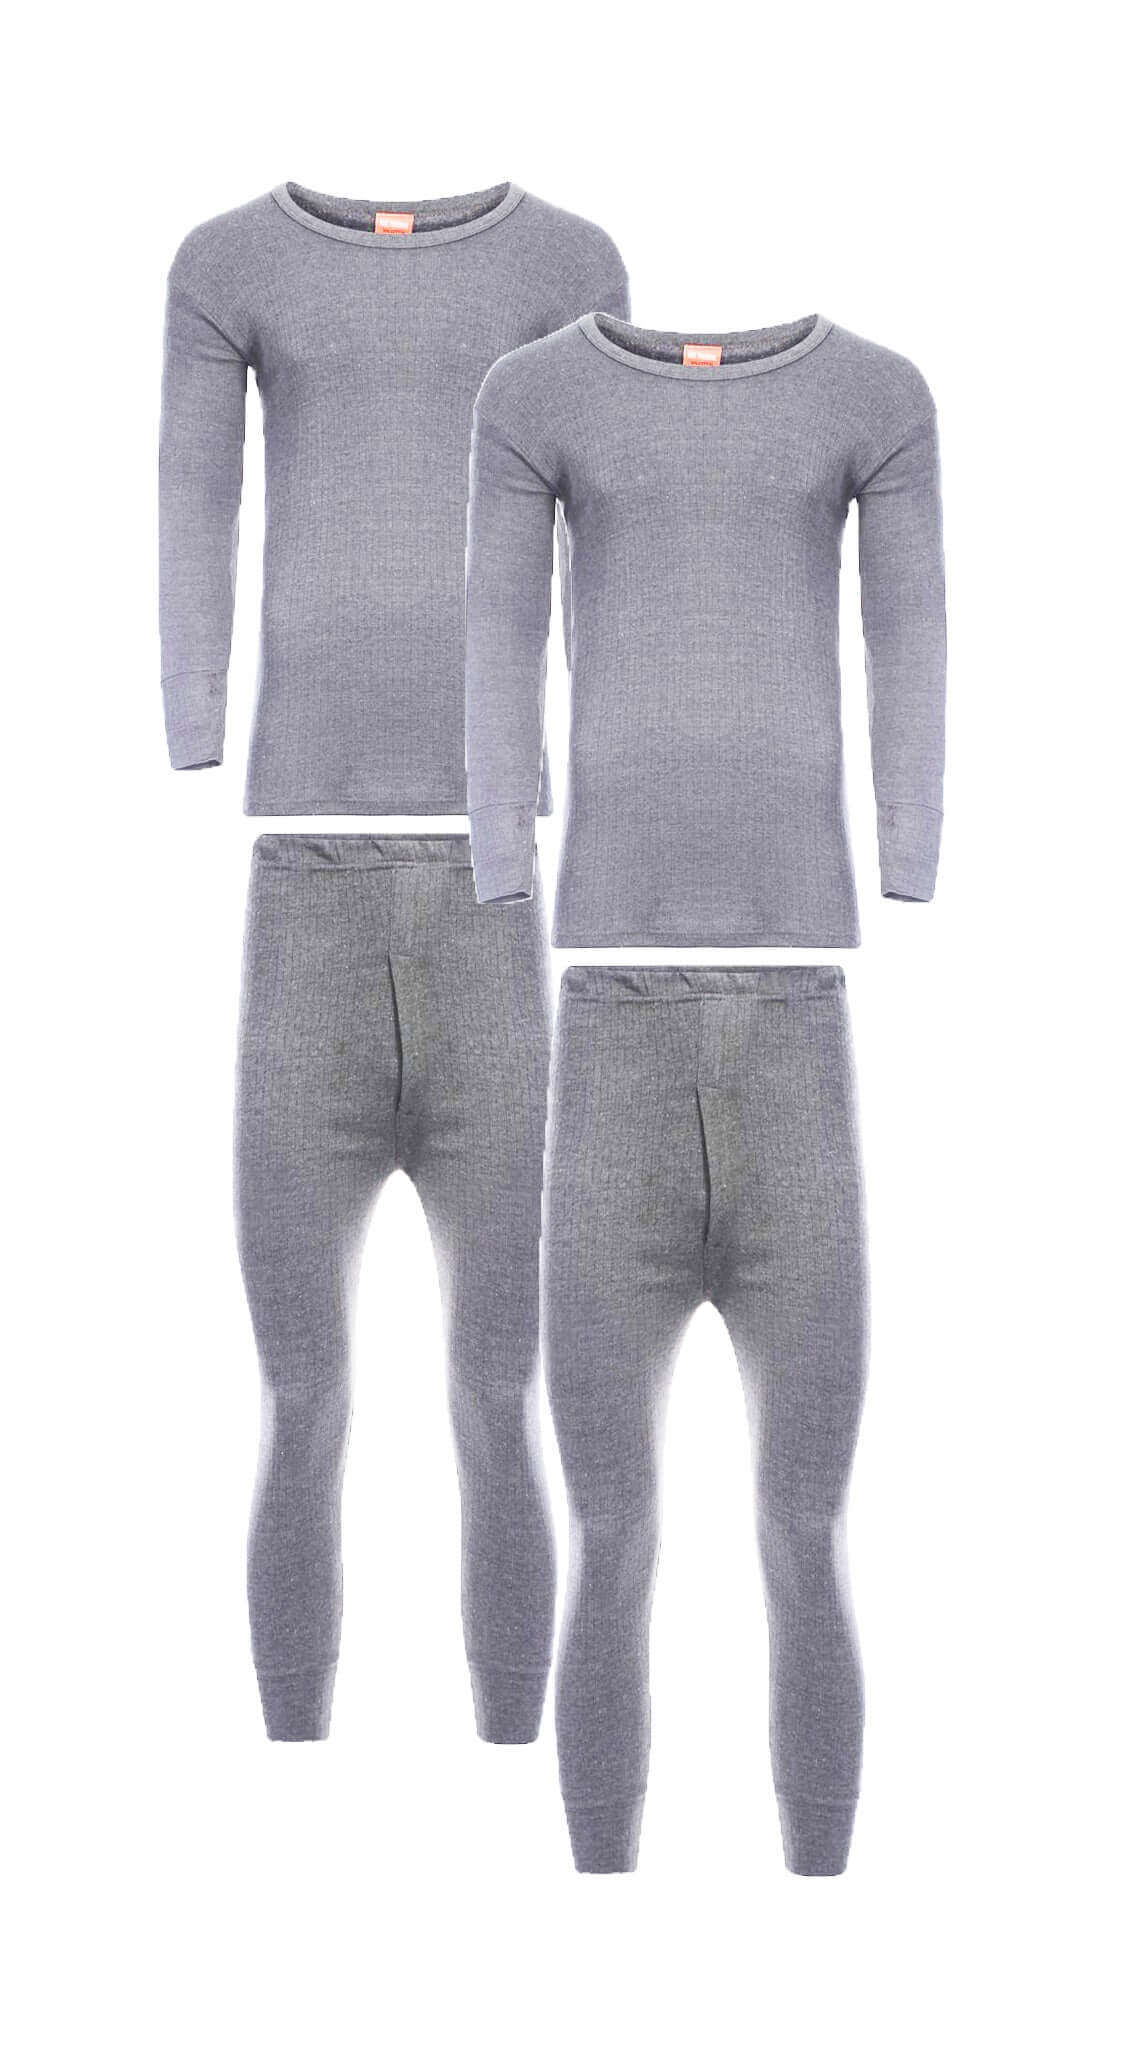 Heating Thermal Underwear Set For Men ,usb Electric Heated Underwear Base  Layer Top And Bottom Long Johns Set T